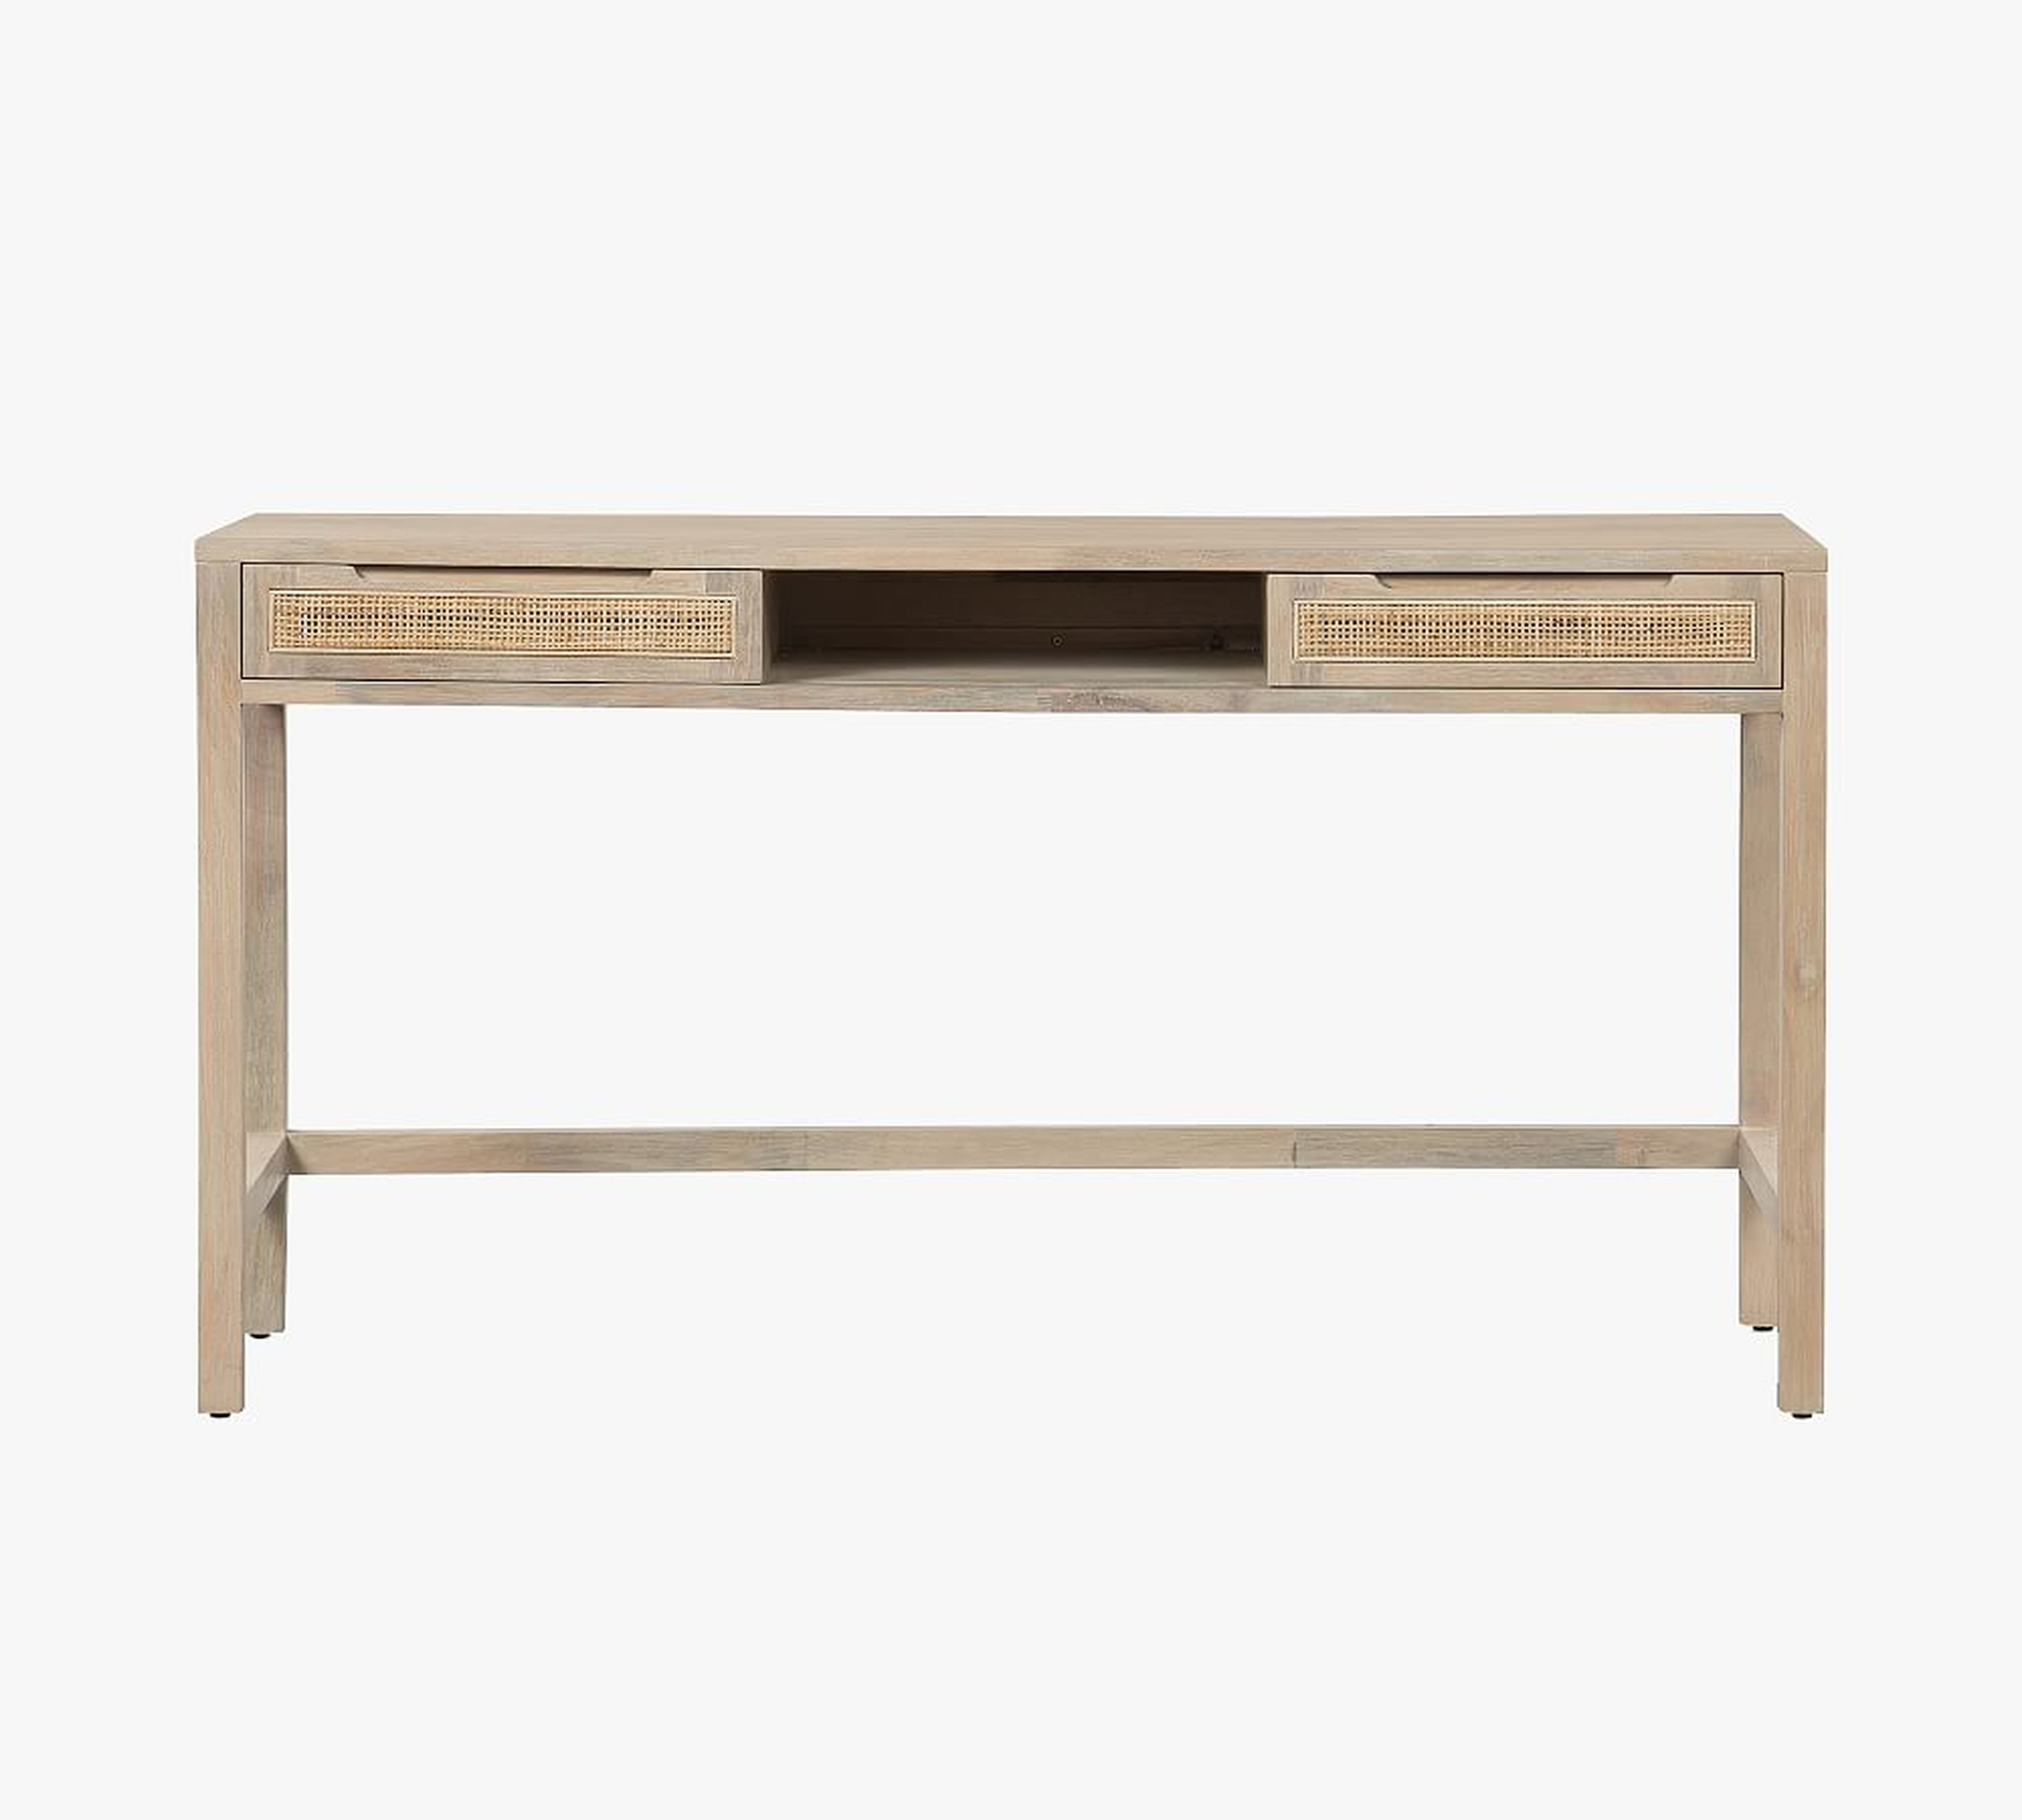 Dolores 58" Cane Writing Desk with Drawers, Natural - Pottery Barn